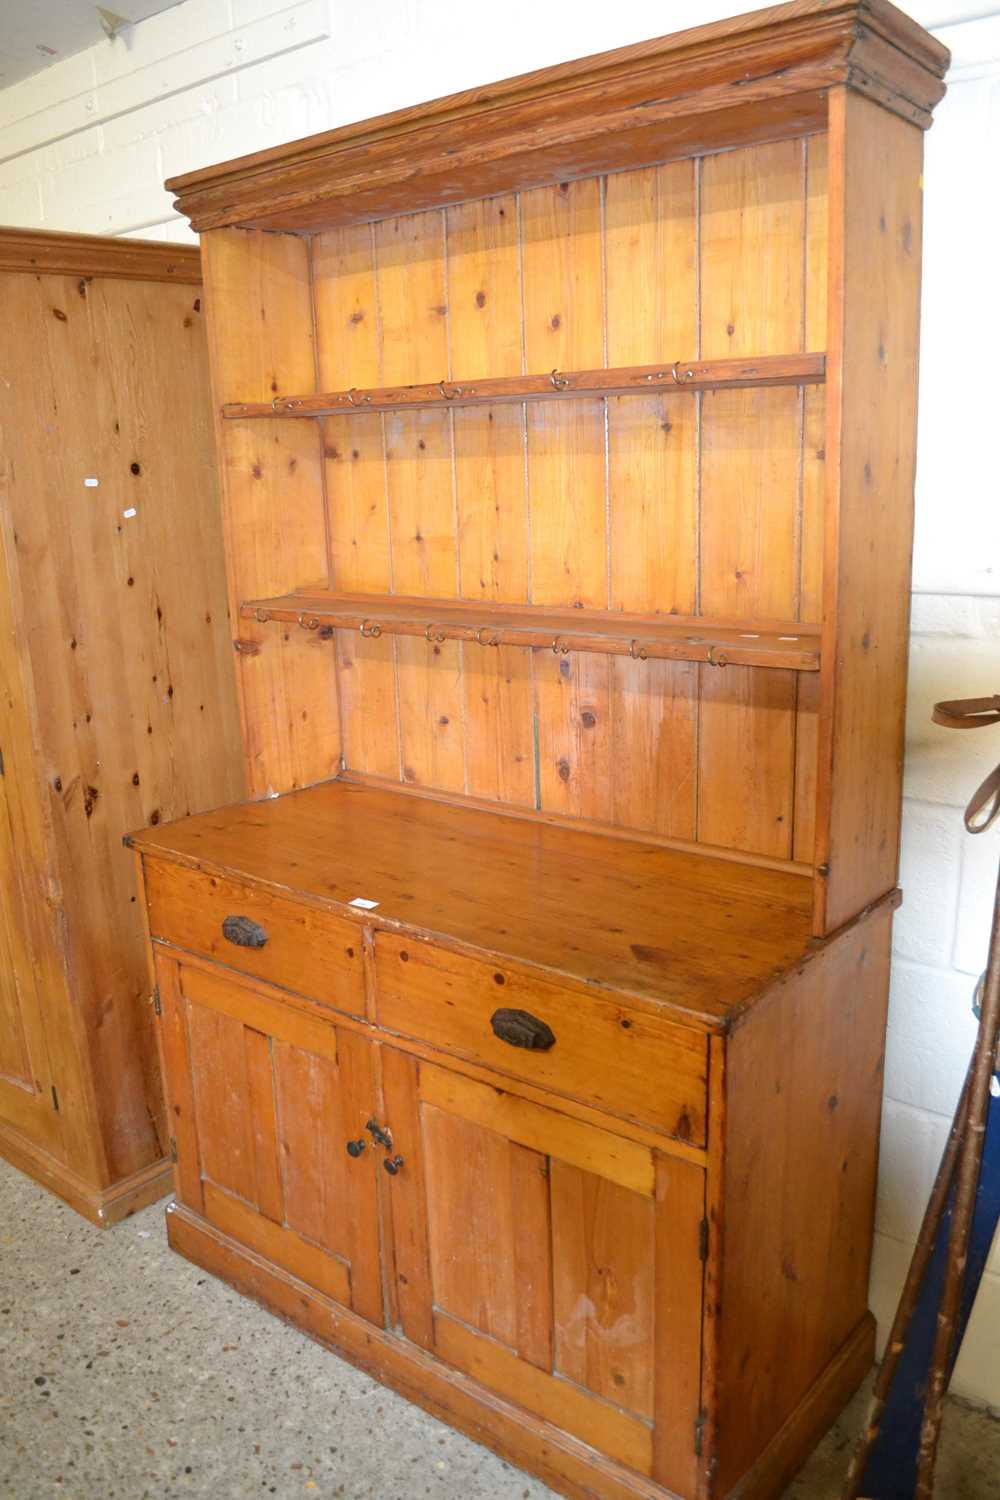 An early 20th Century pine kitchen dresser formed of two sections with drawer and cupboard base